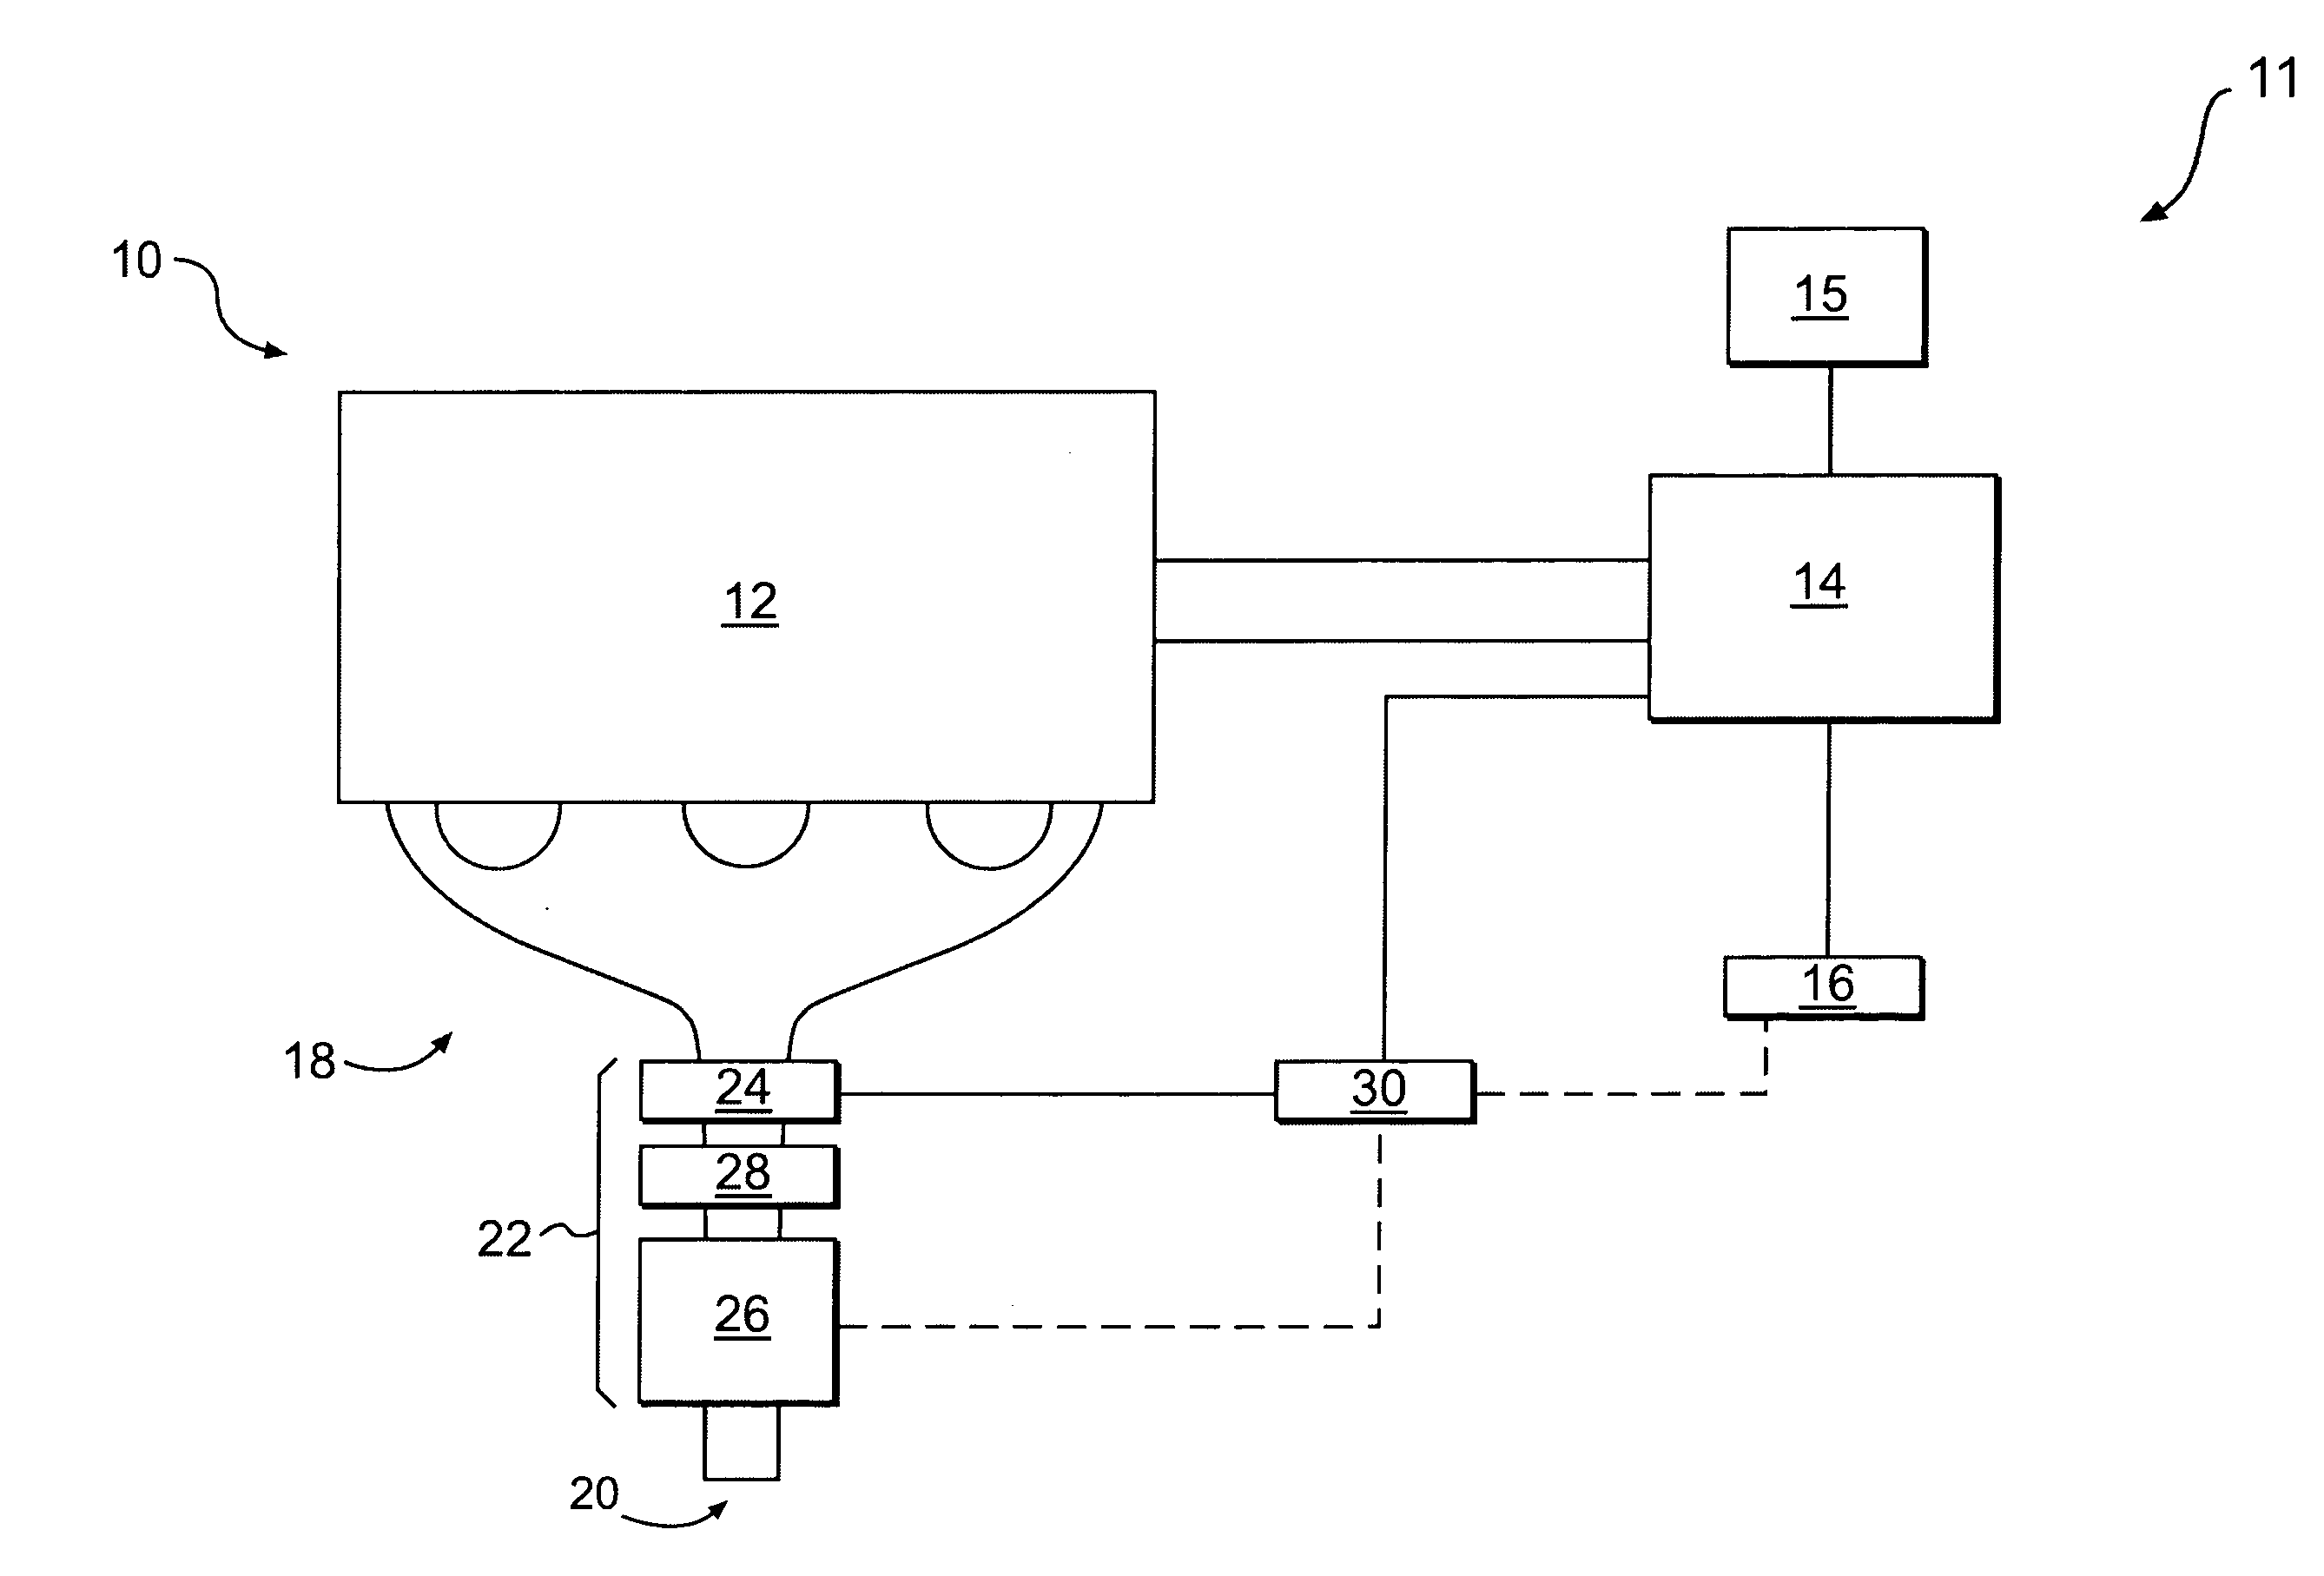 Catalyst temperature control system for a hybrid engine